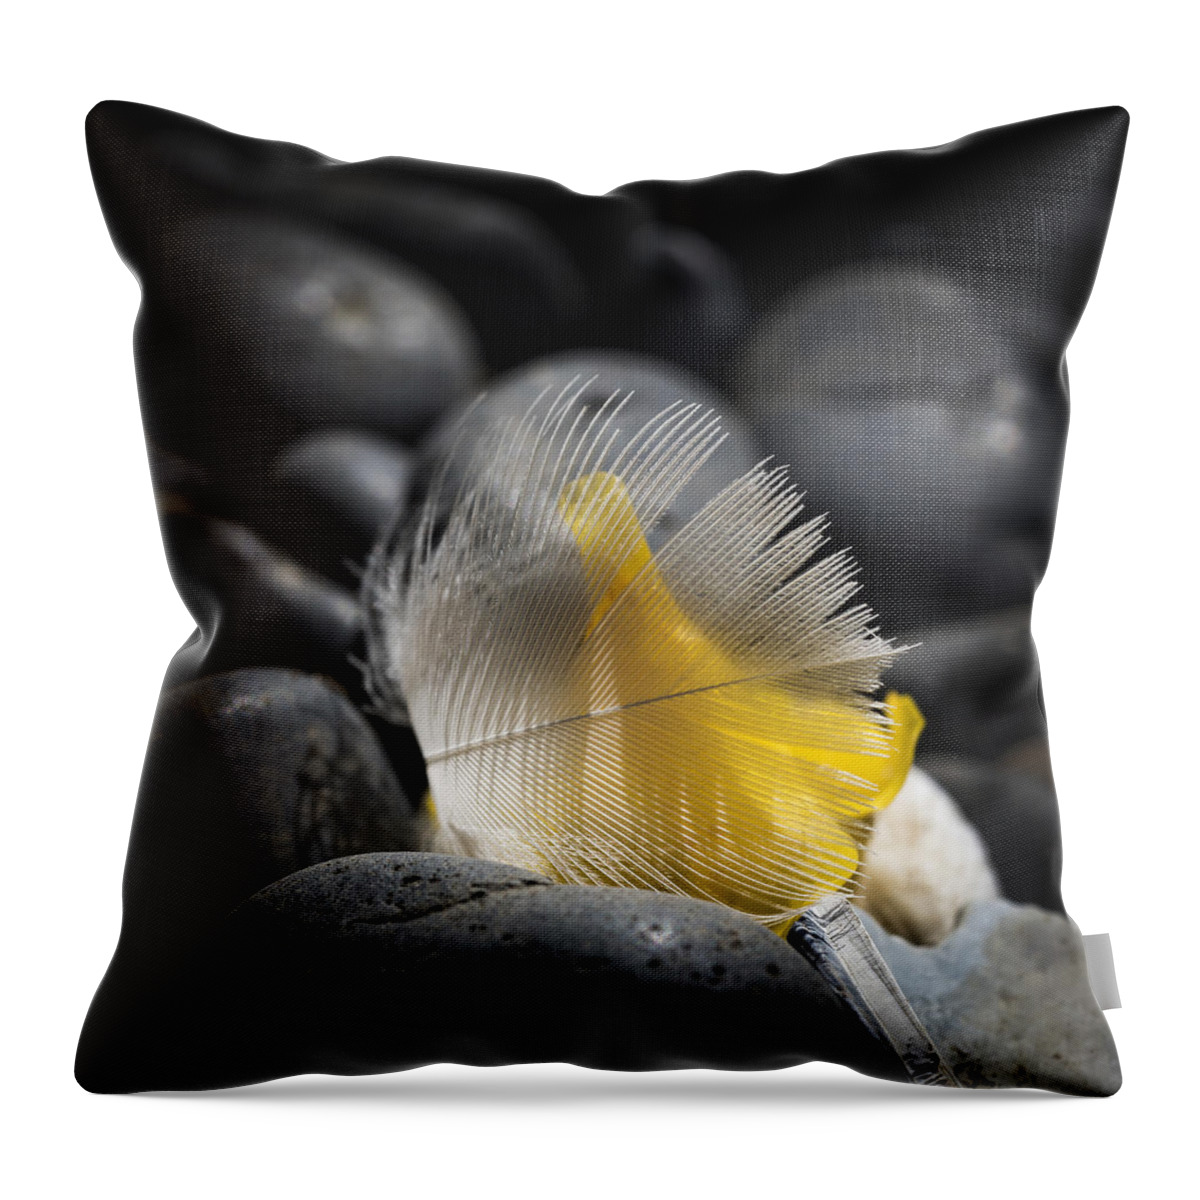 Beaches Throw Pillow featuring the photograph Feathered Mimulus by Robert Potts